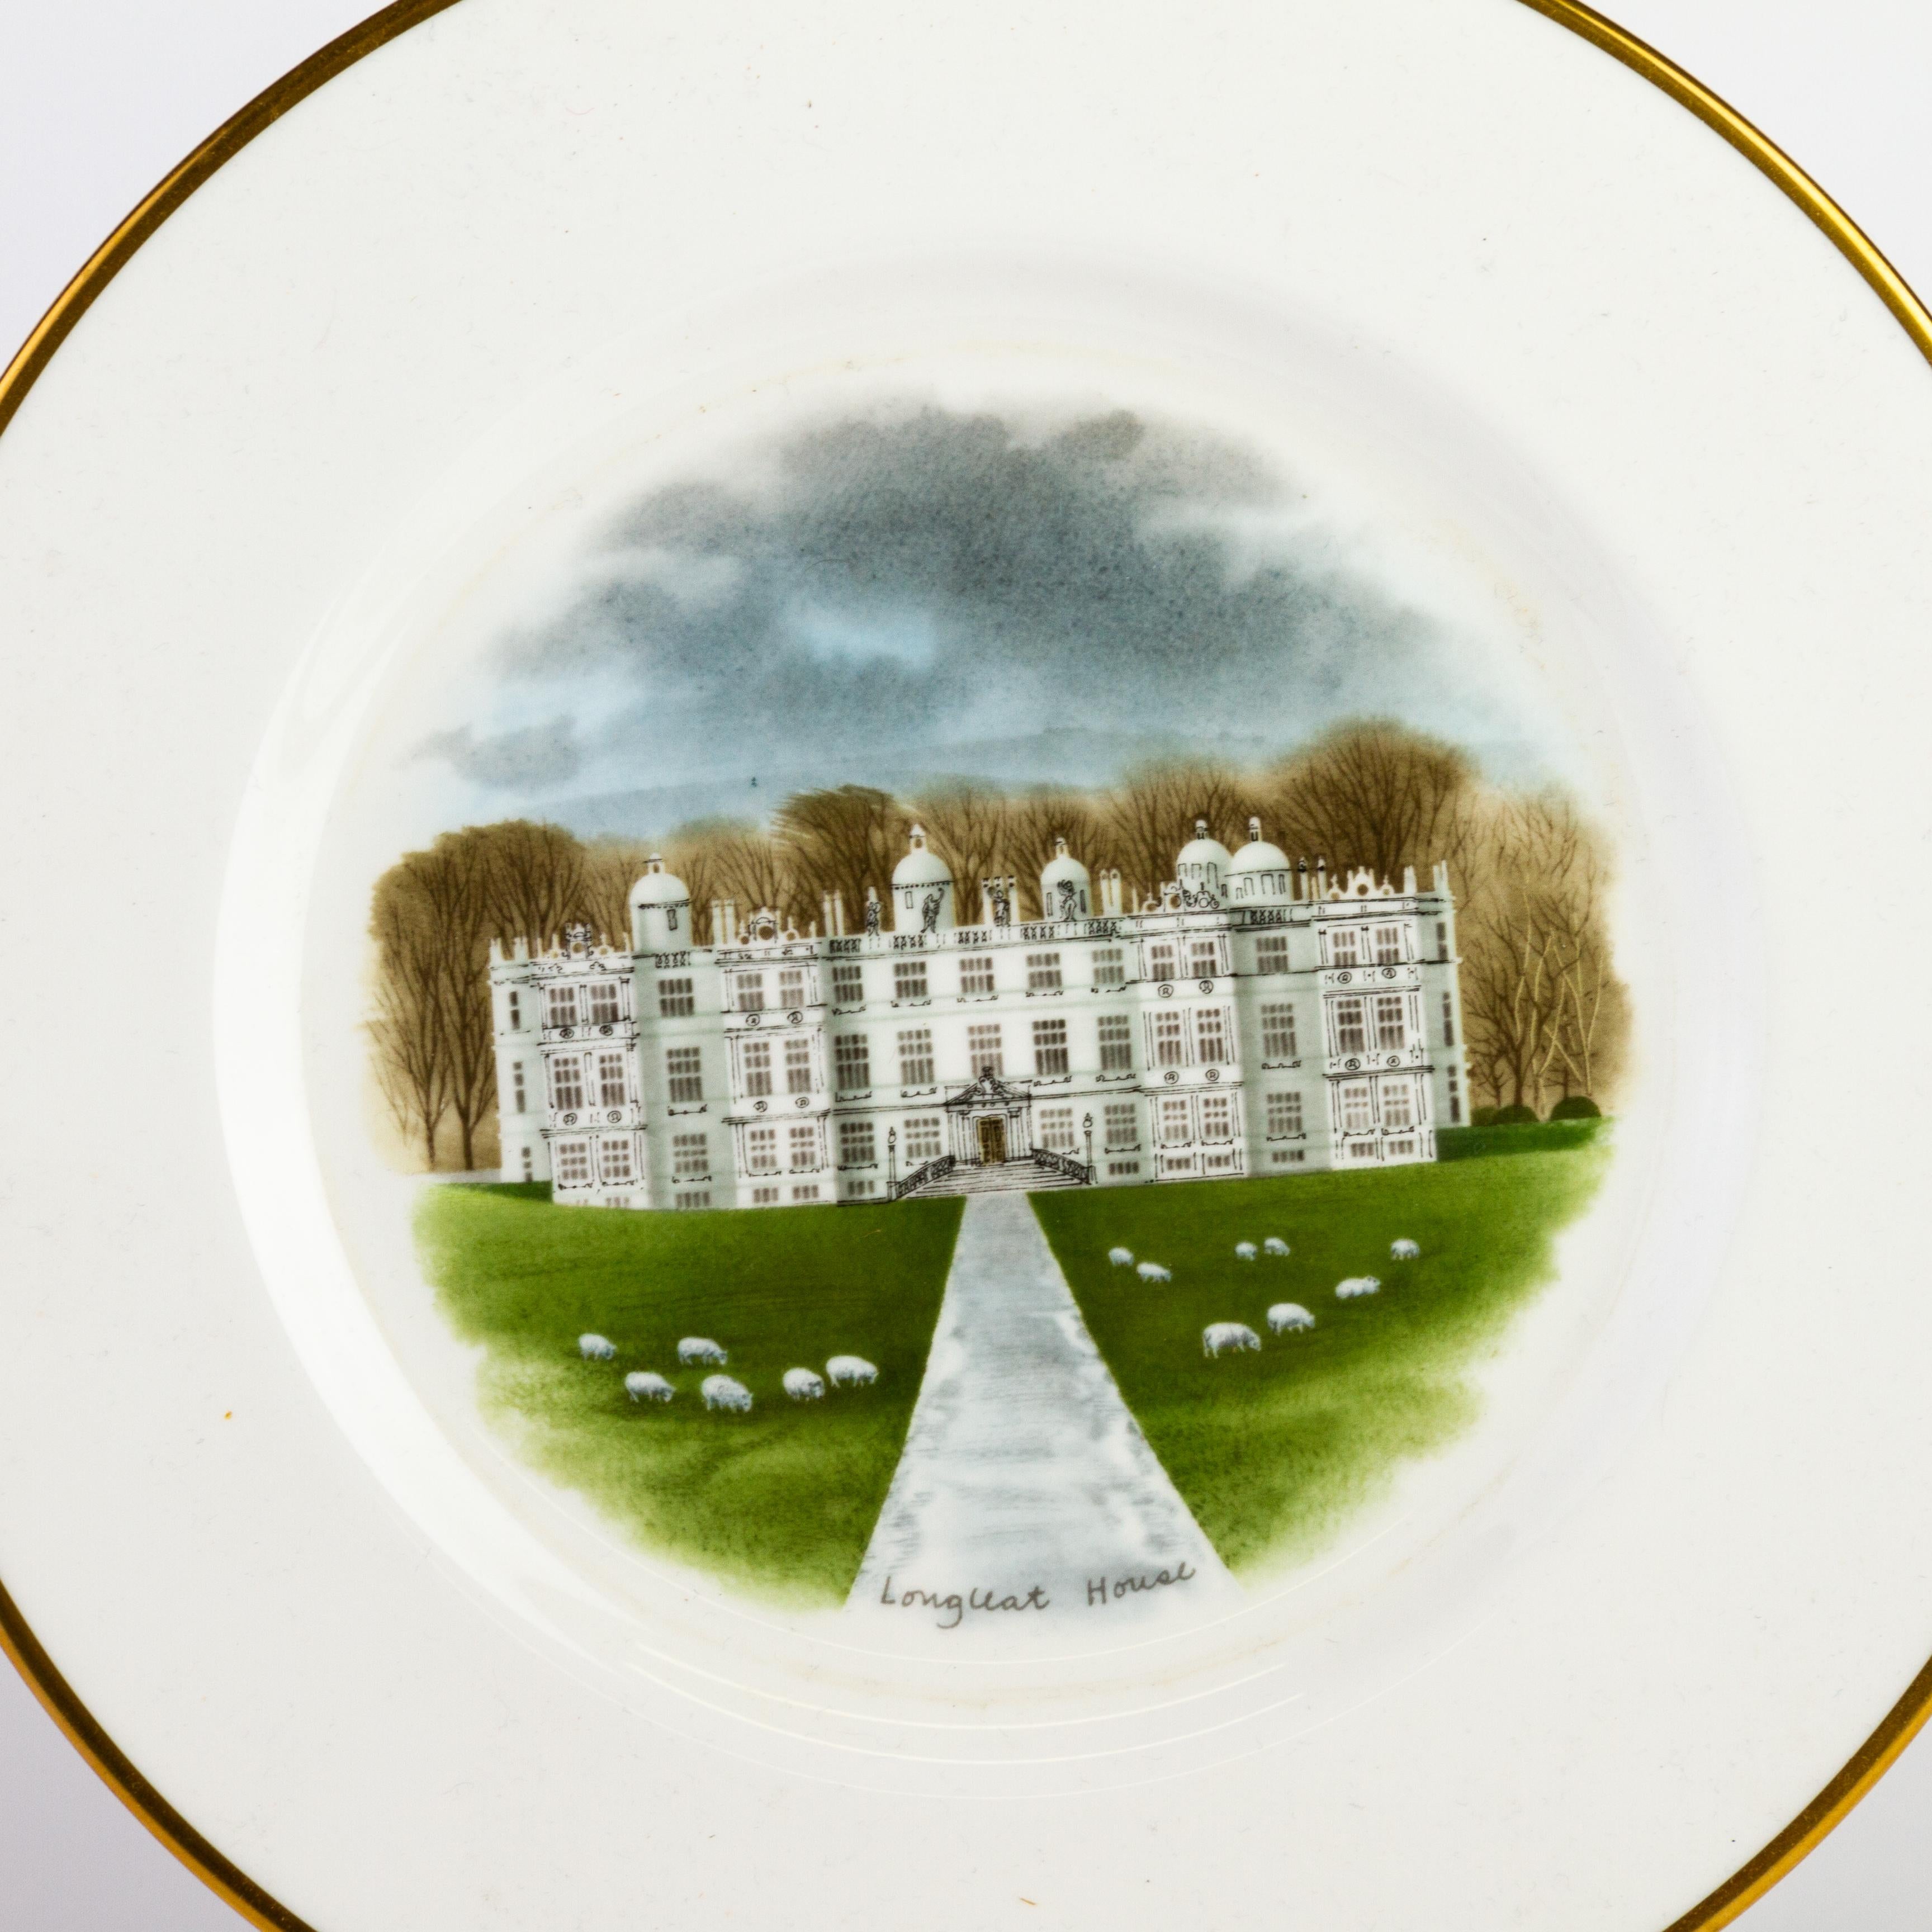 Wedgwood Fine English Porcelain Plate 
Good condition overall, as seen.

Free international shipping.